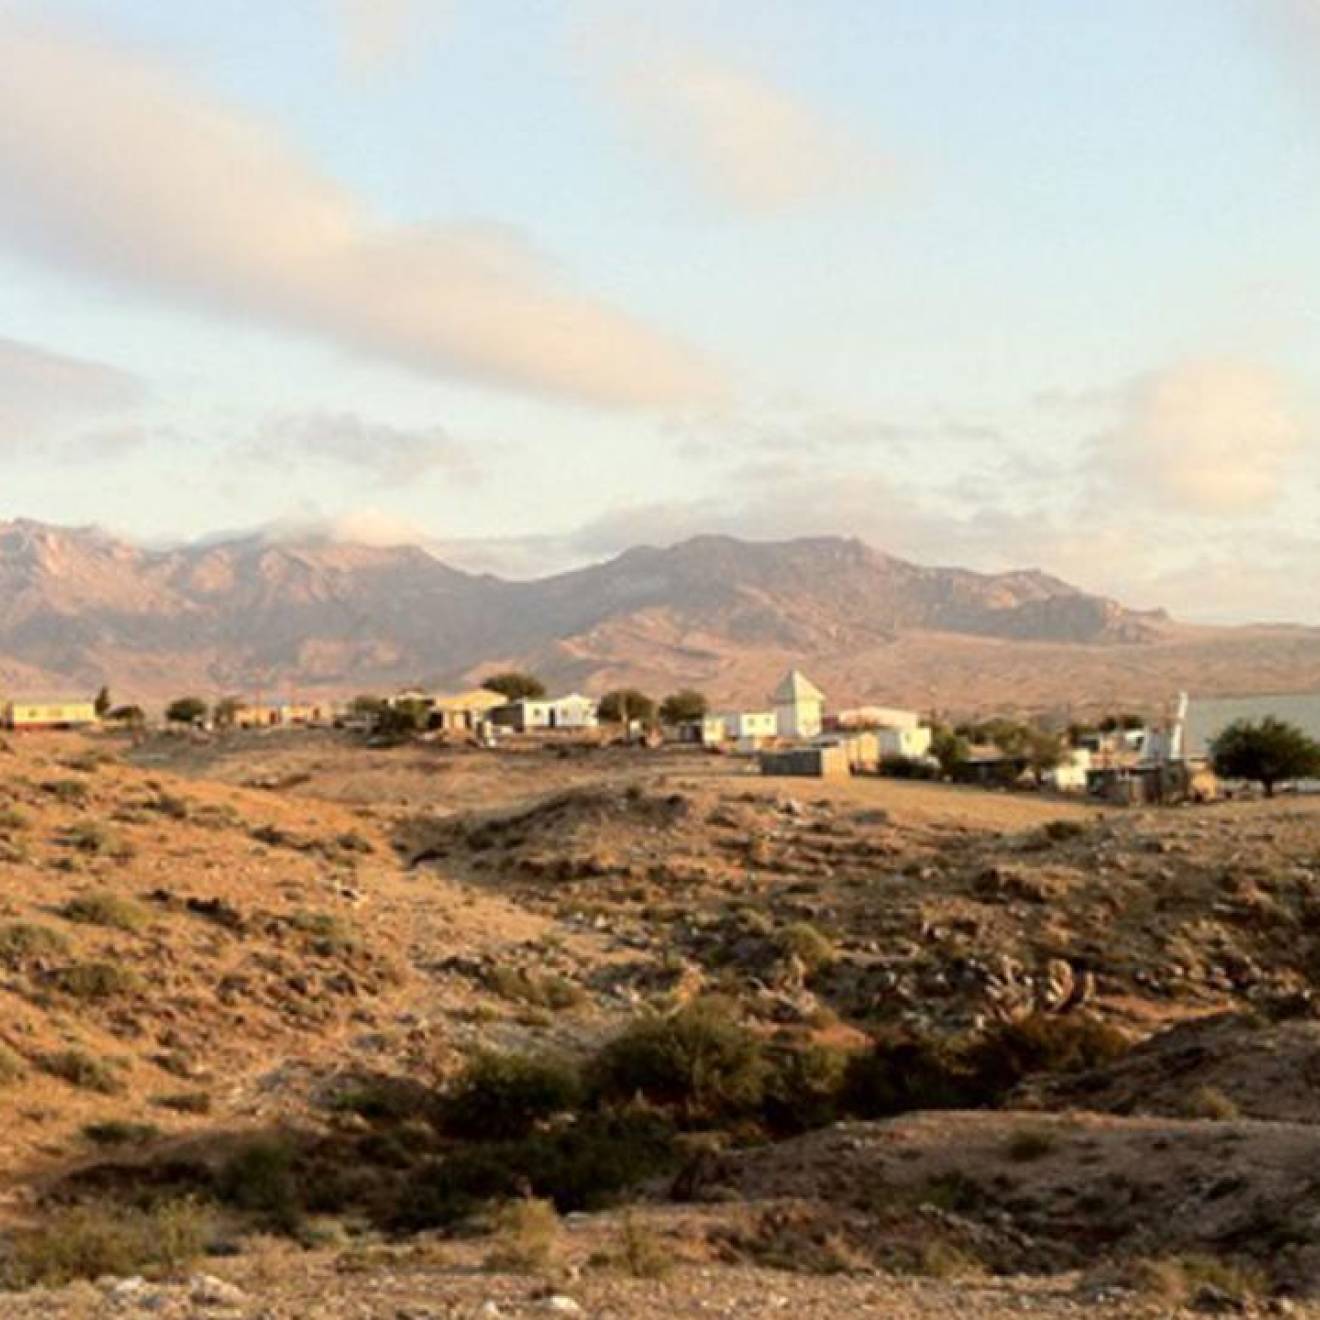 View of the village of Kuboes, on the border of South Africa and Namibia